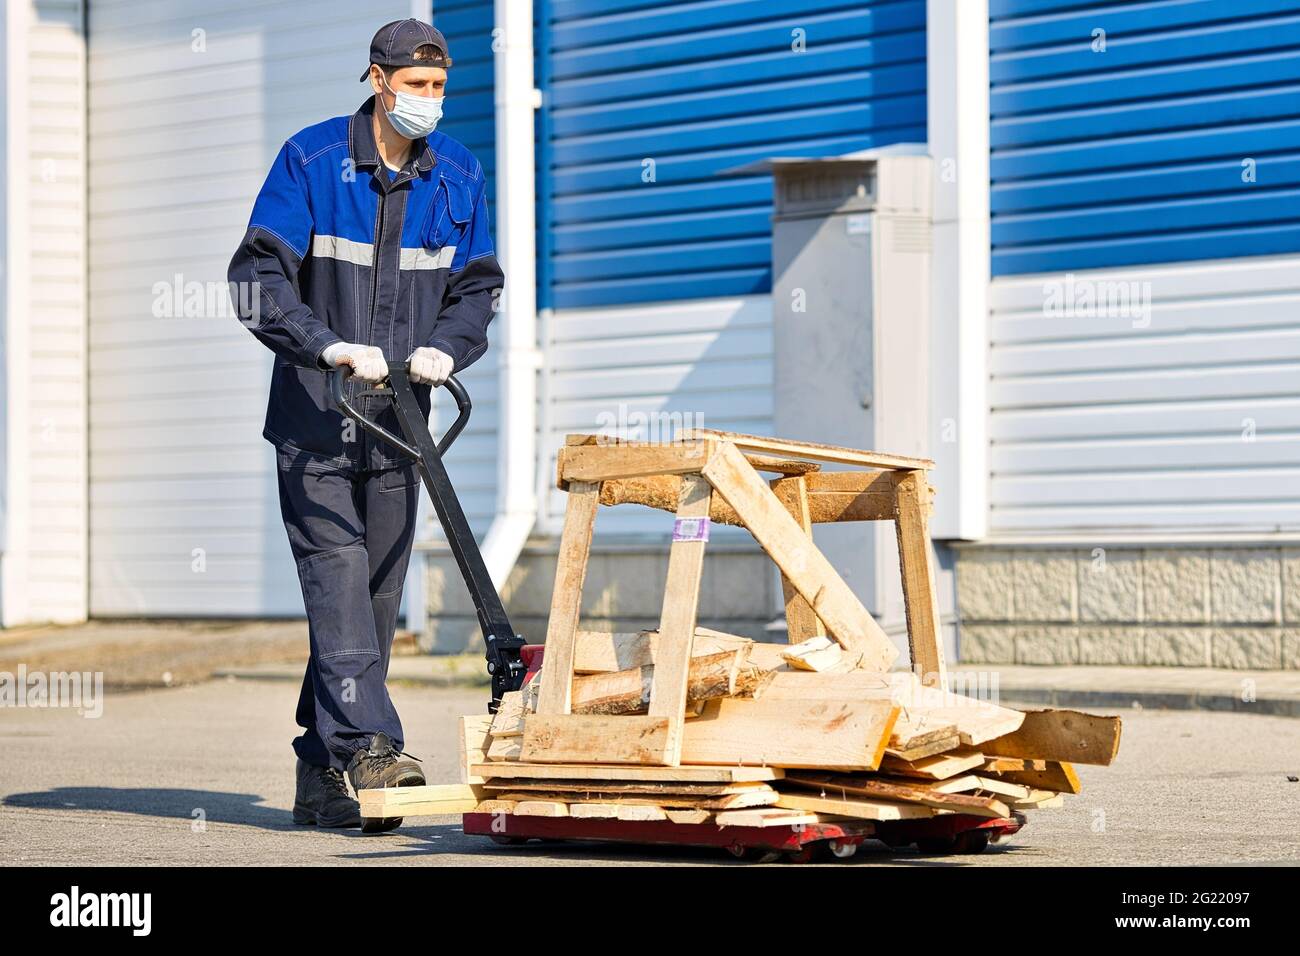 A man in work clothes and a medical mask carries wooden planks on a cart on the territory of an industrial base on a summer day. Work in accordance with sanitary standards Stock Photo